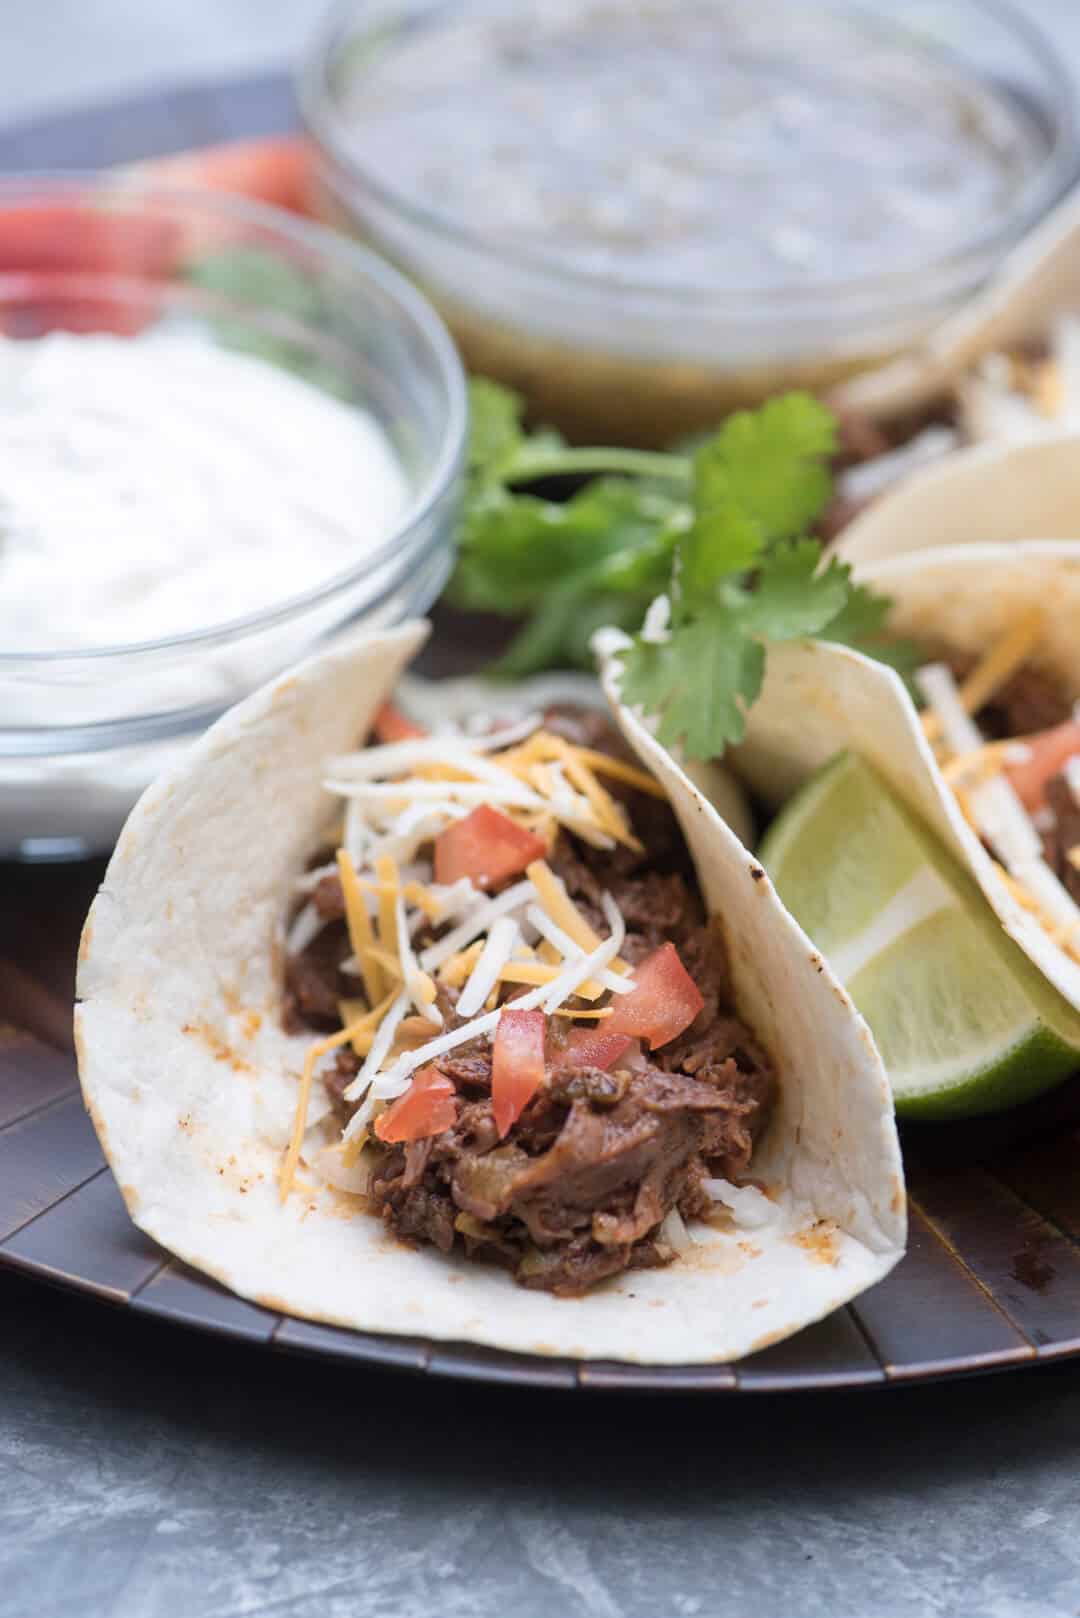 Shredded beef tacos on a platter with a small bowl of sour cream.